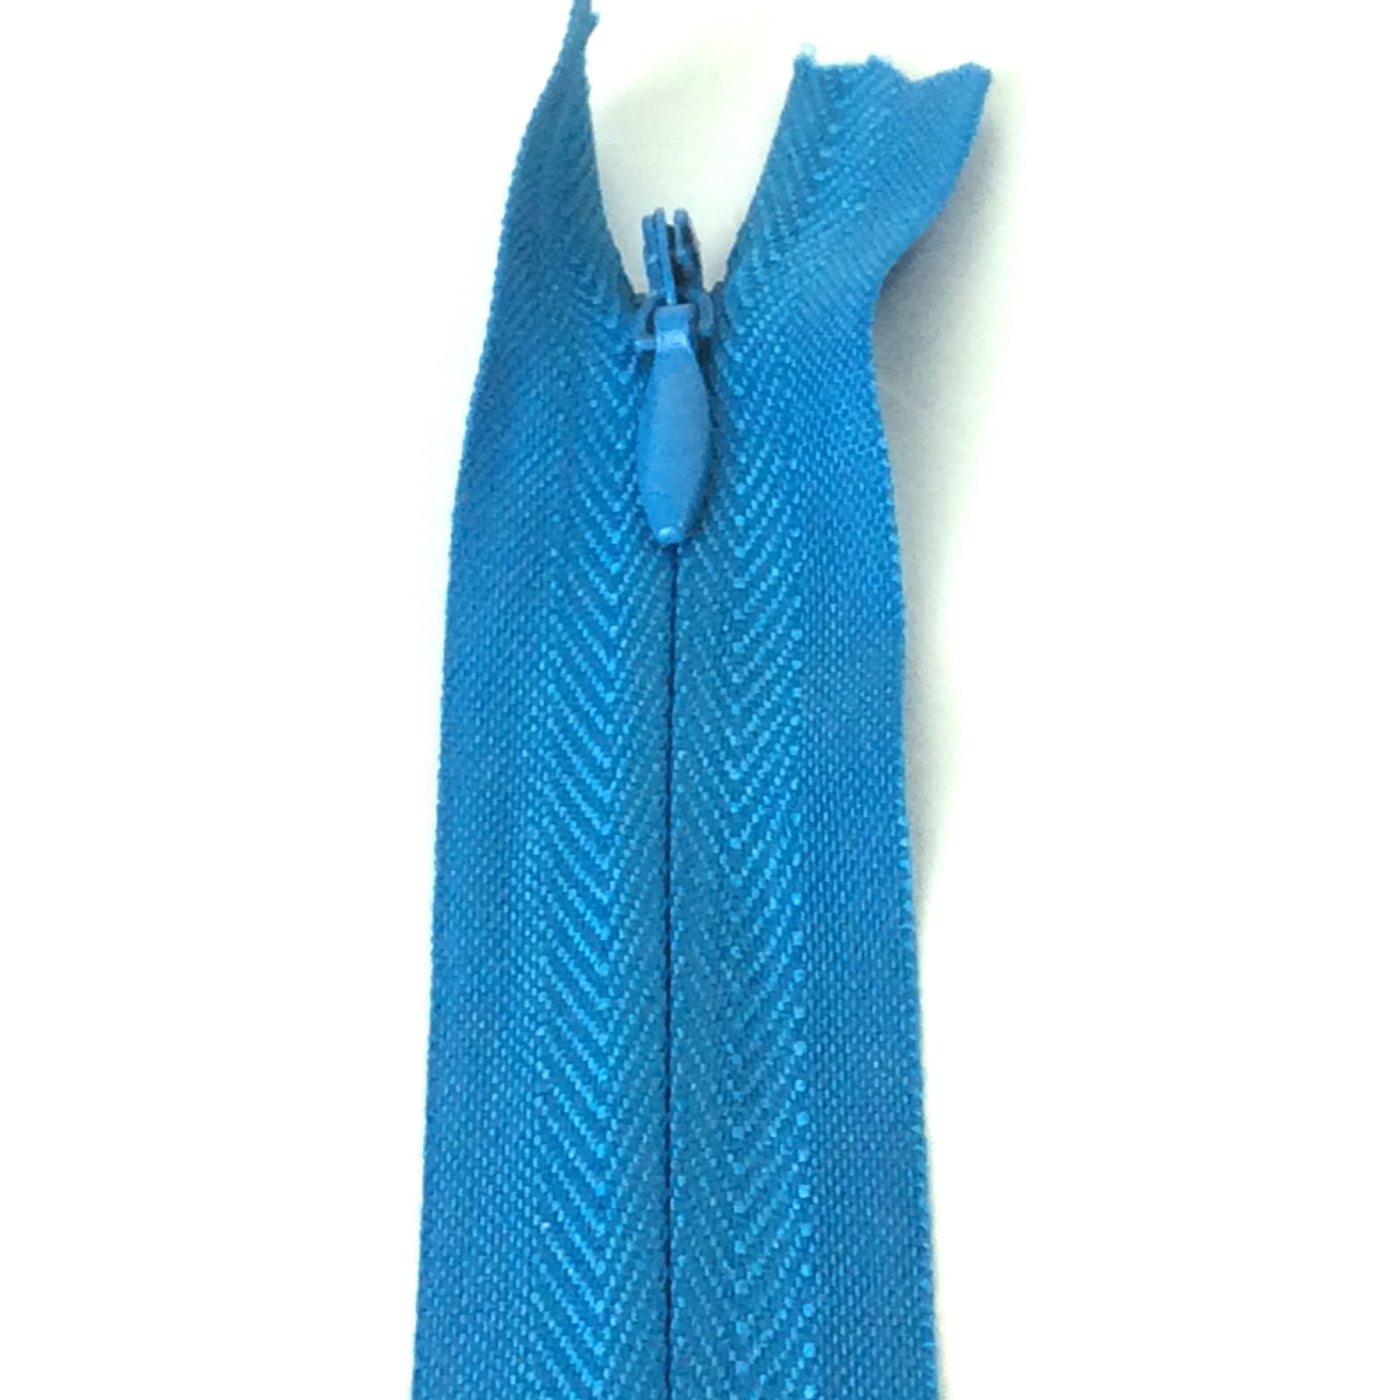 Photo of turquoise invisible or concealed zips available in many different colours and sizes. Great for achieving a professional finish in your products. Invisible zippers are perfect for dressmaking, cushions, crafts, etc., where you don't want your zipper showing. Installing them can be tricky without the right foot on your machine; a normal zipper foot is for installing standard zippers, while you will need an invisible zipper foot for a professional result